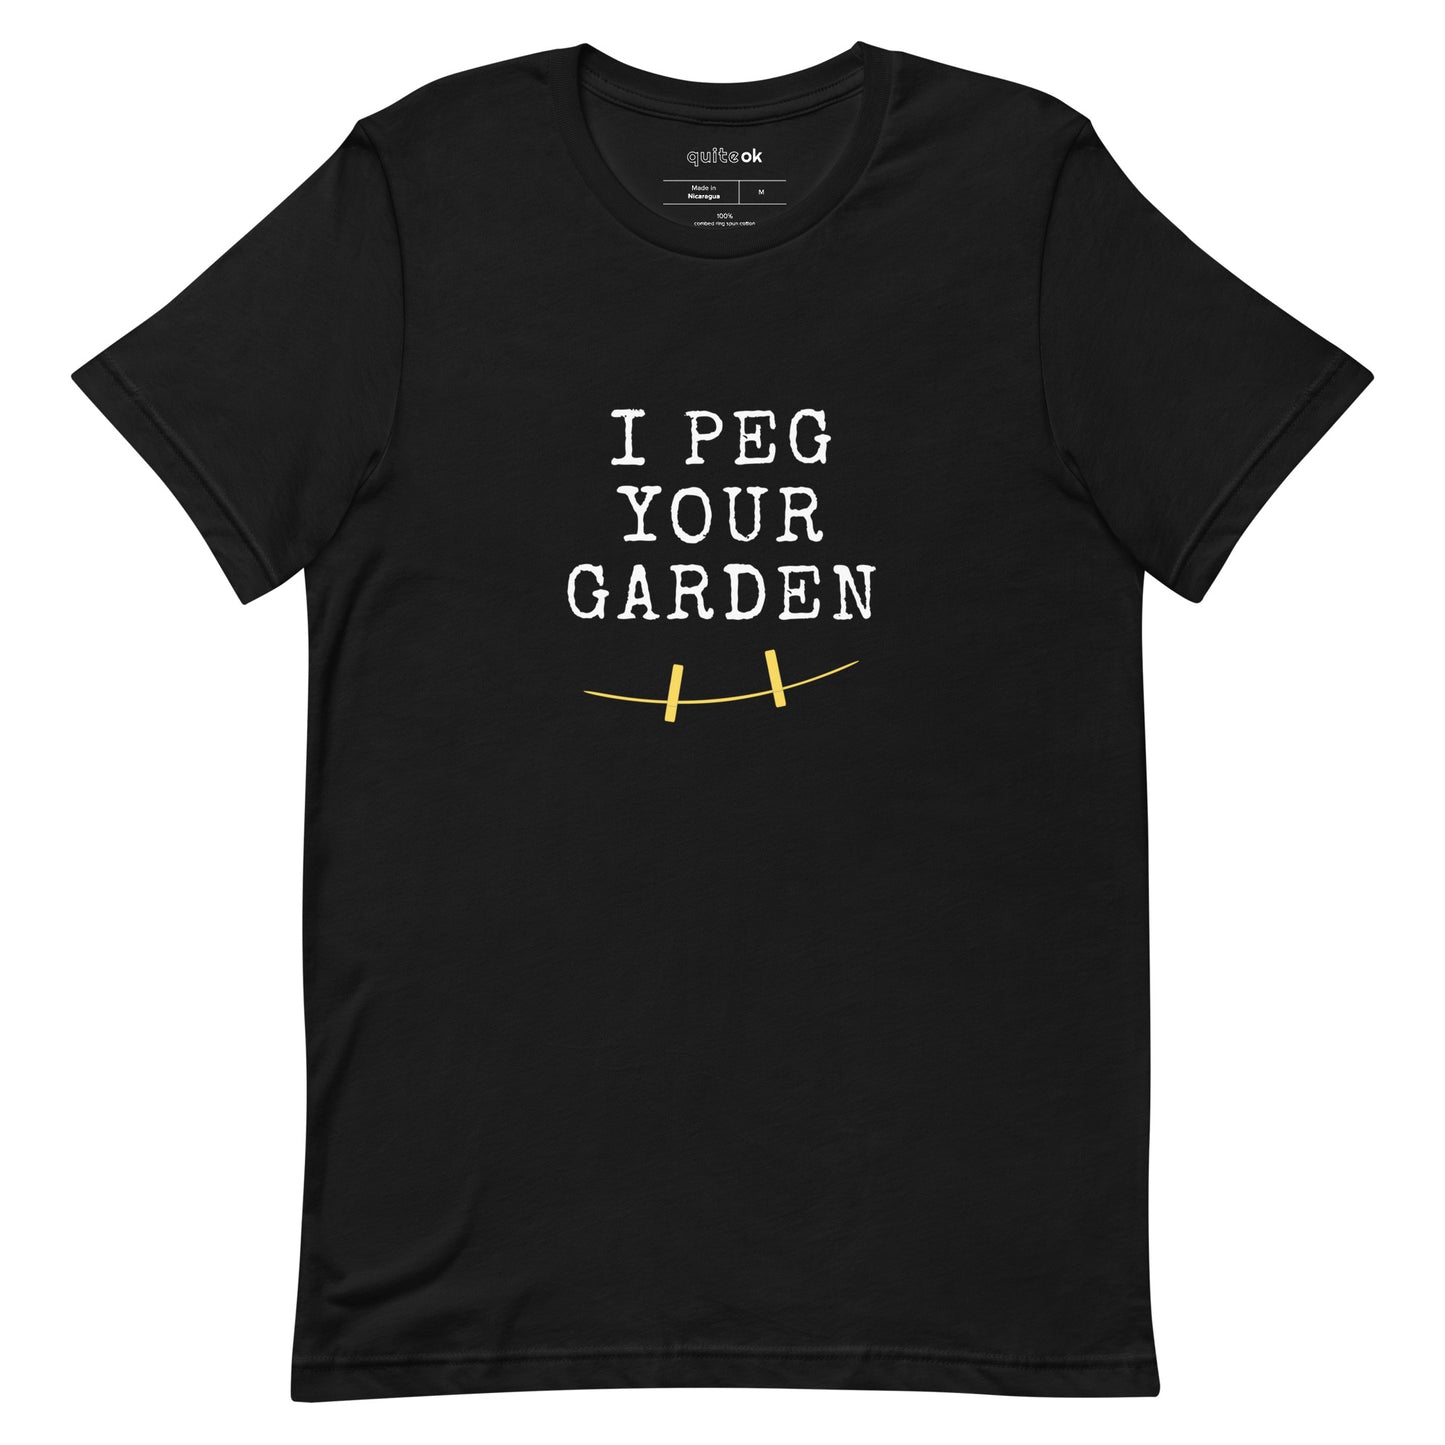 I Peg Your Garden Comedy Quote T-Shirt